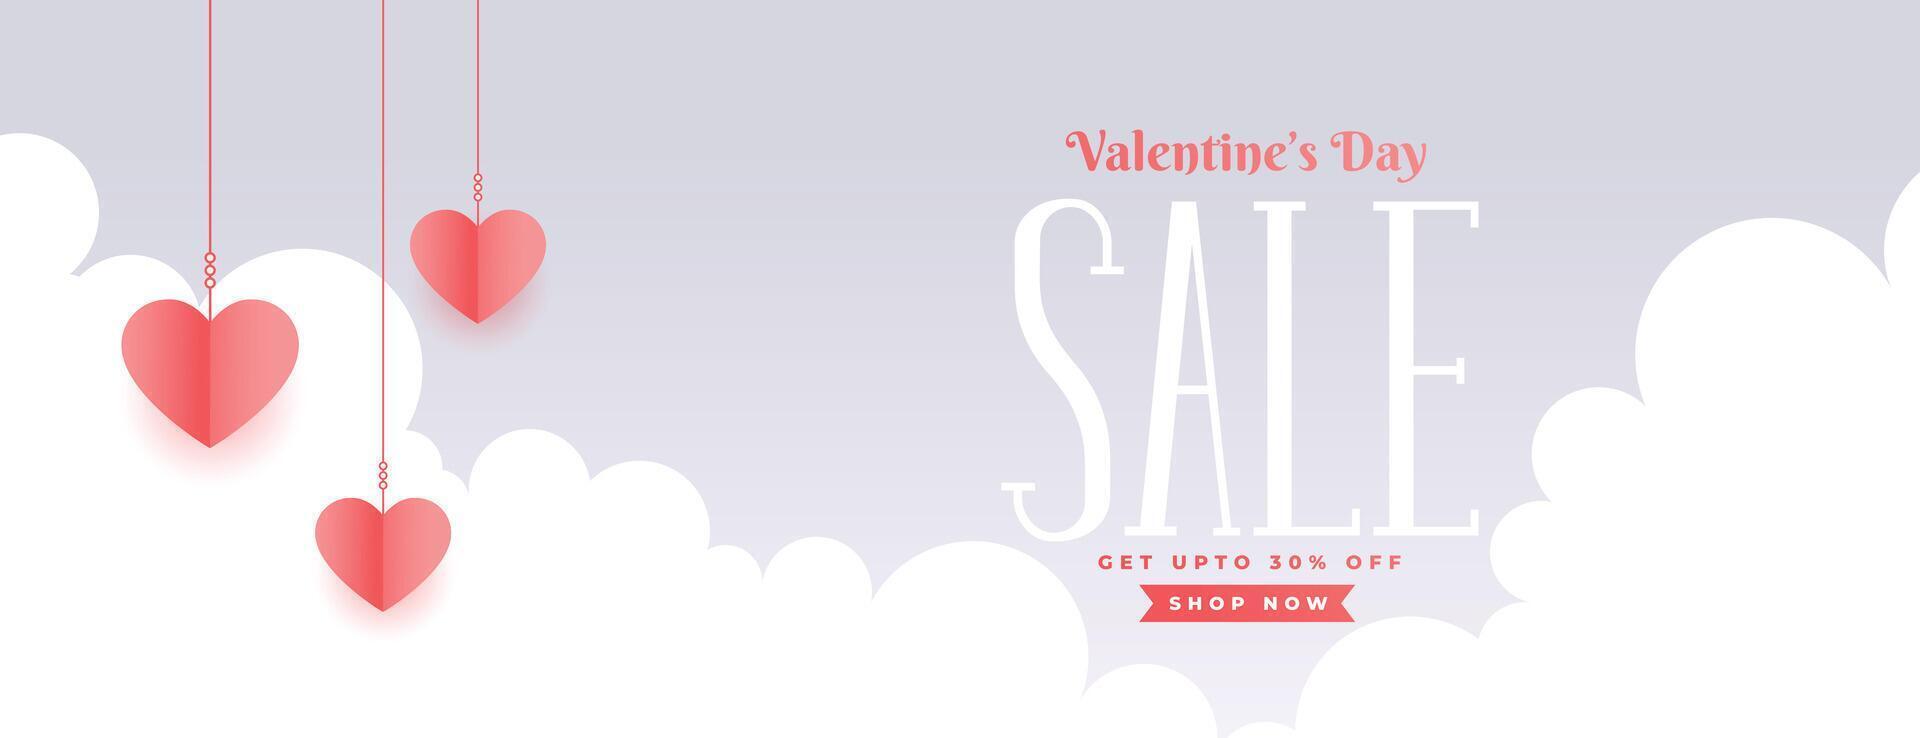 valentines day sale banner with clouds and hanging hearts vector